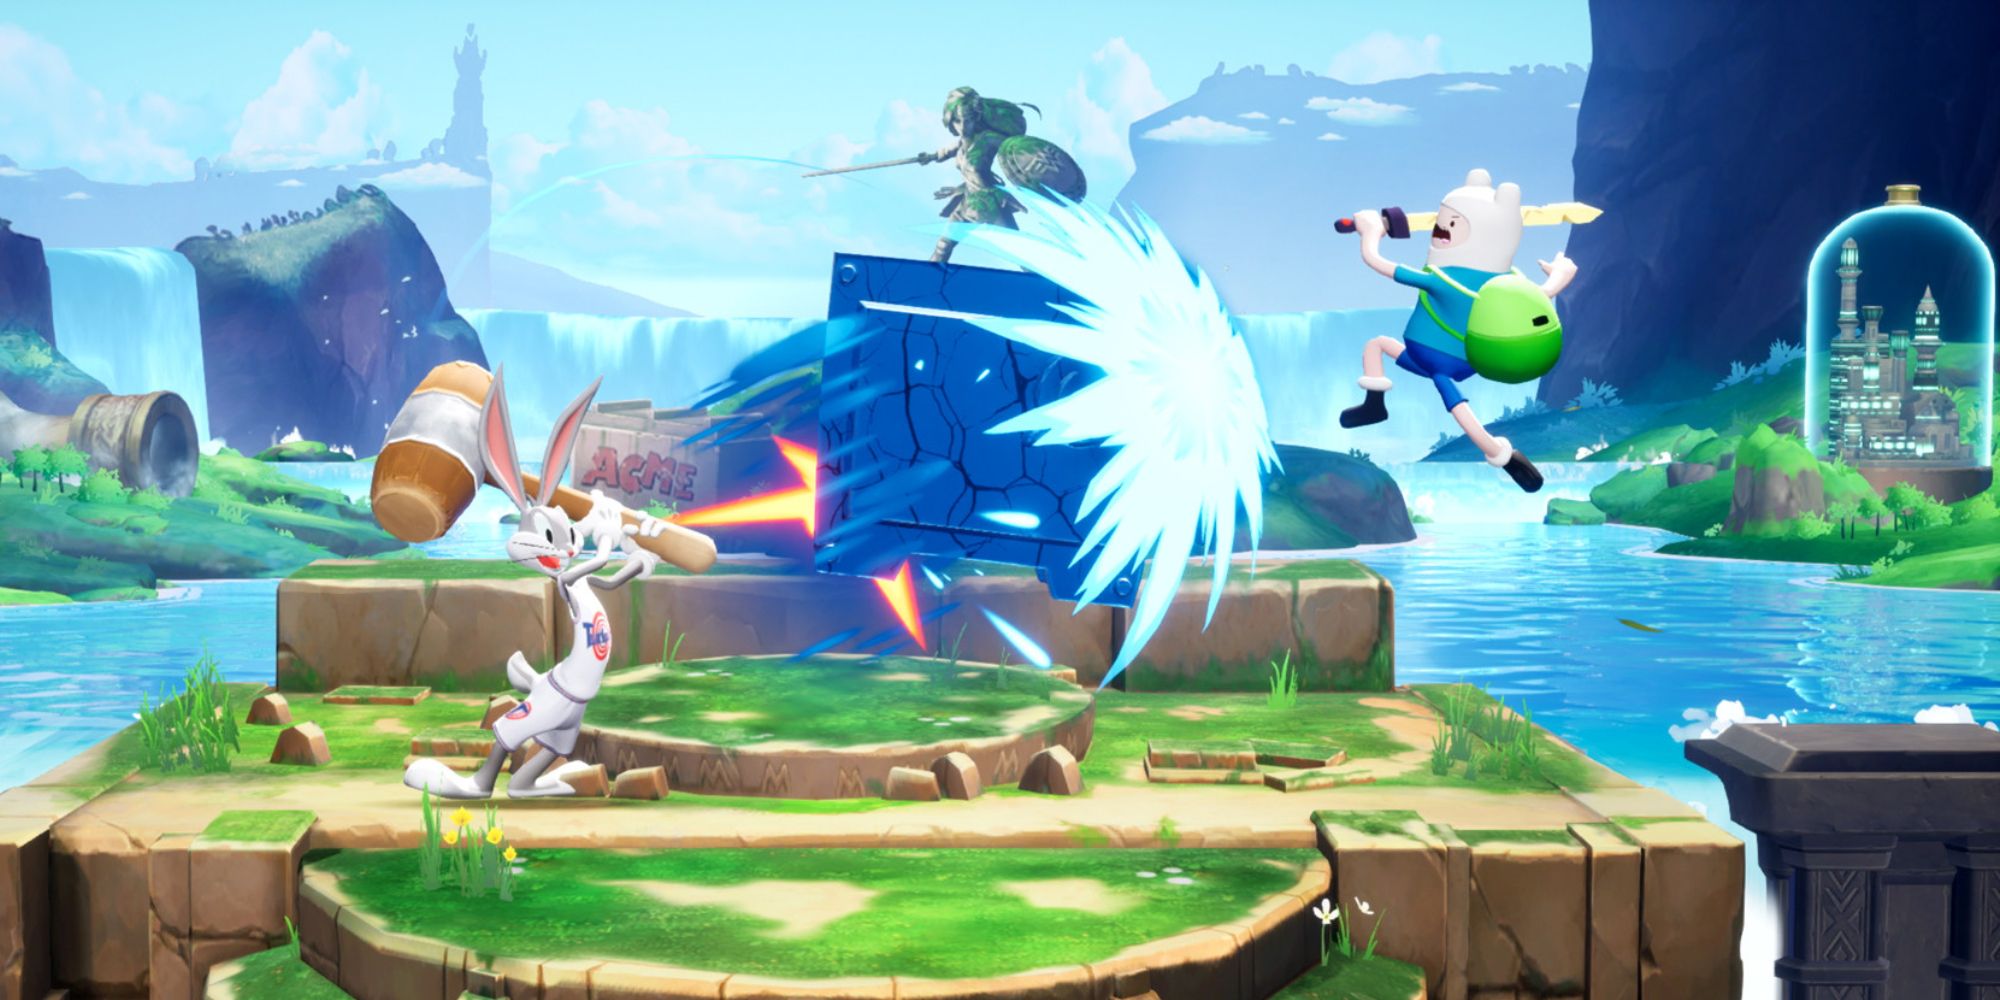 Bugs Bunny and Finn from Adventure Time fighting.